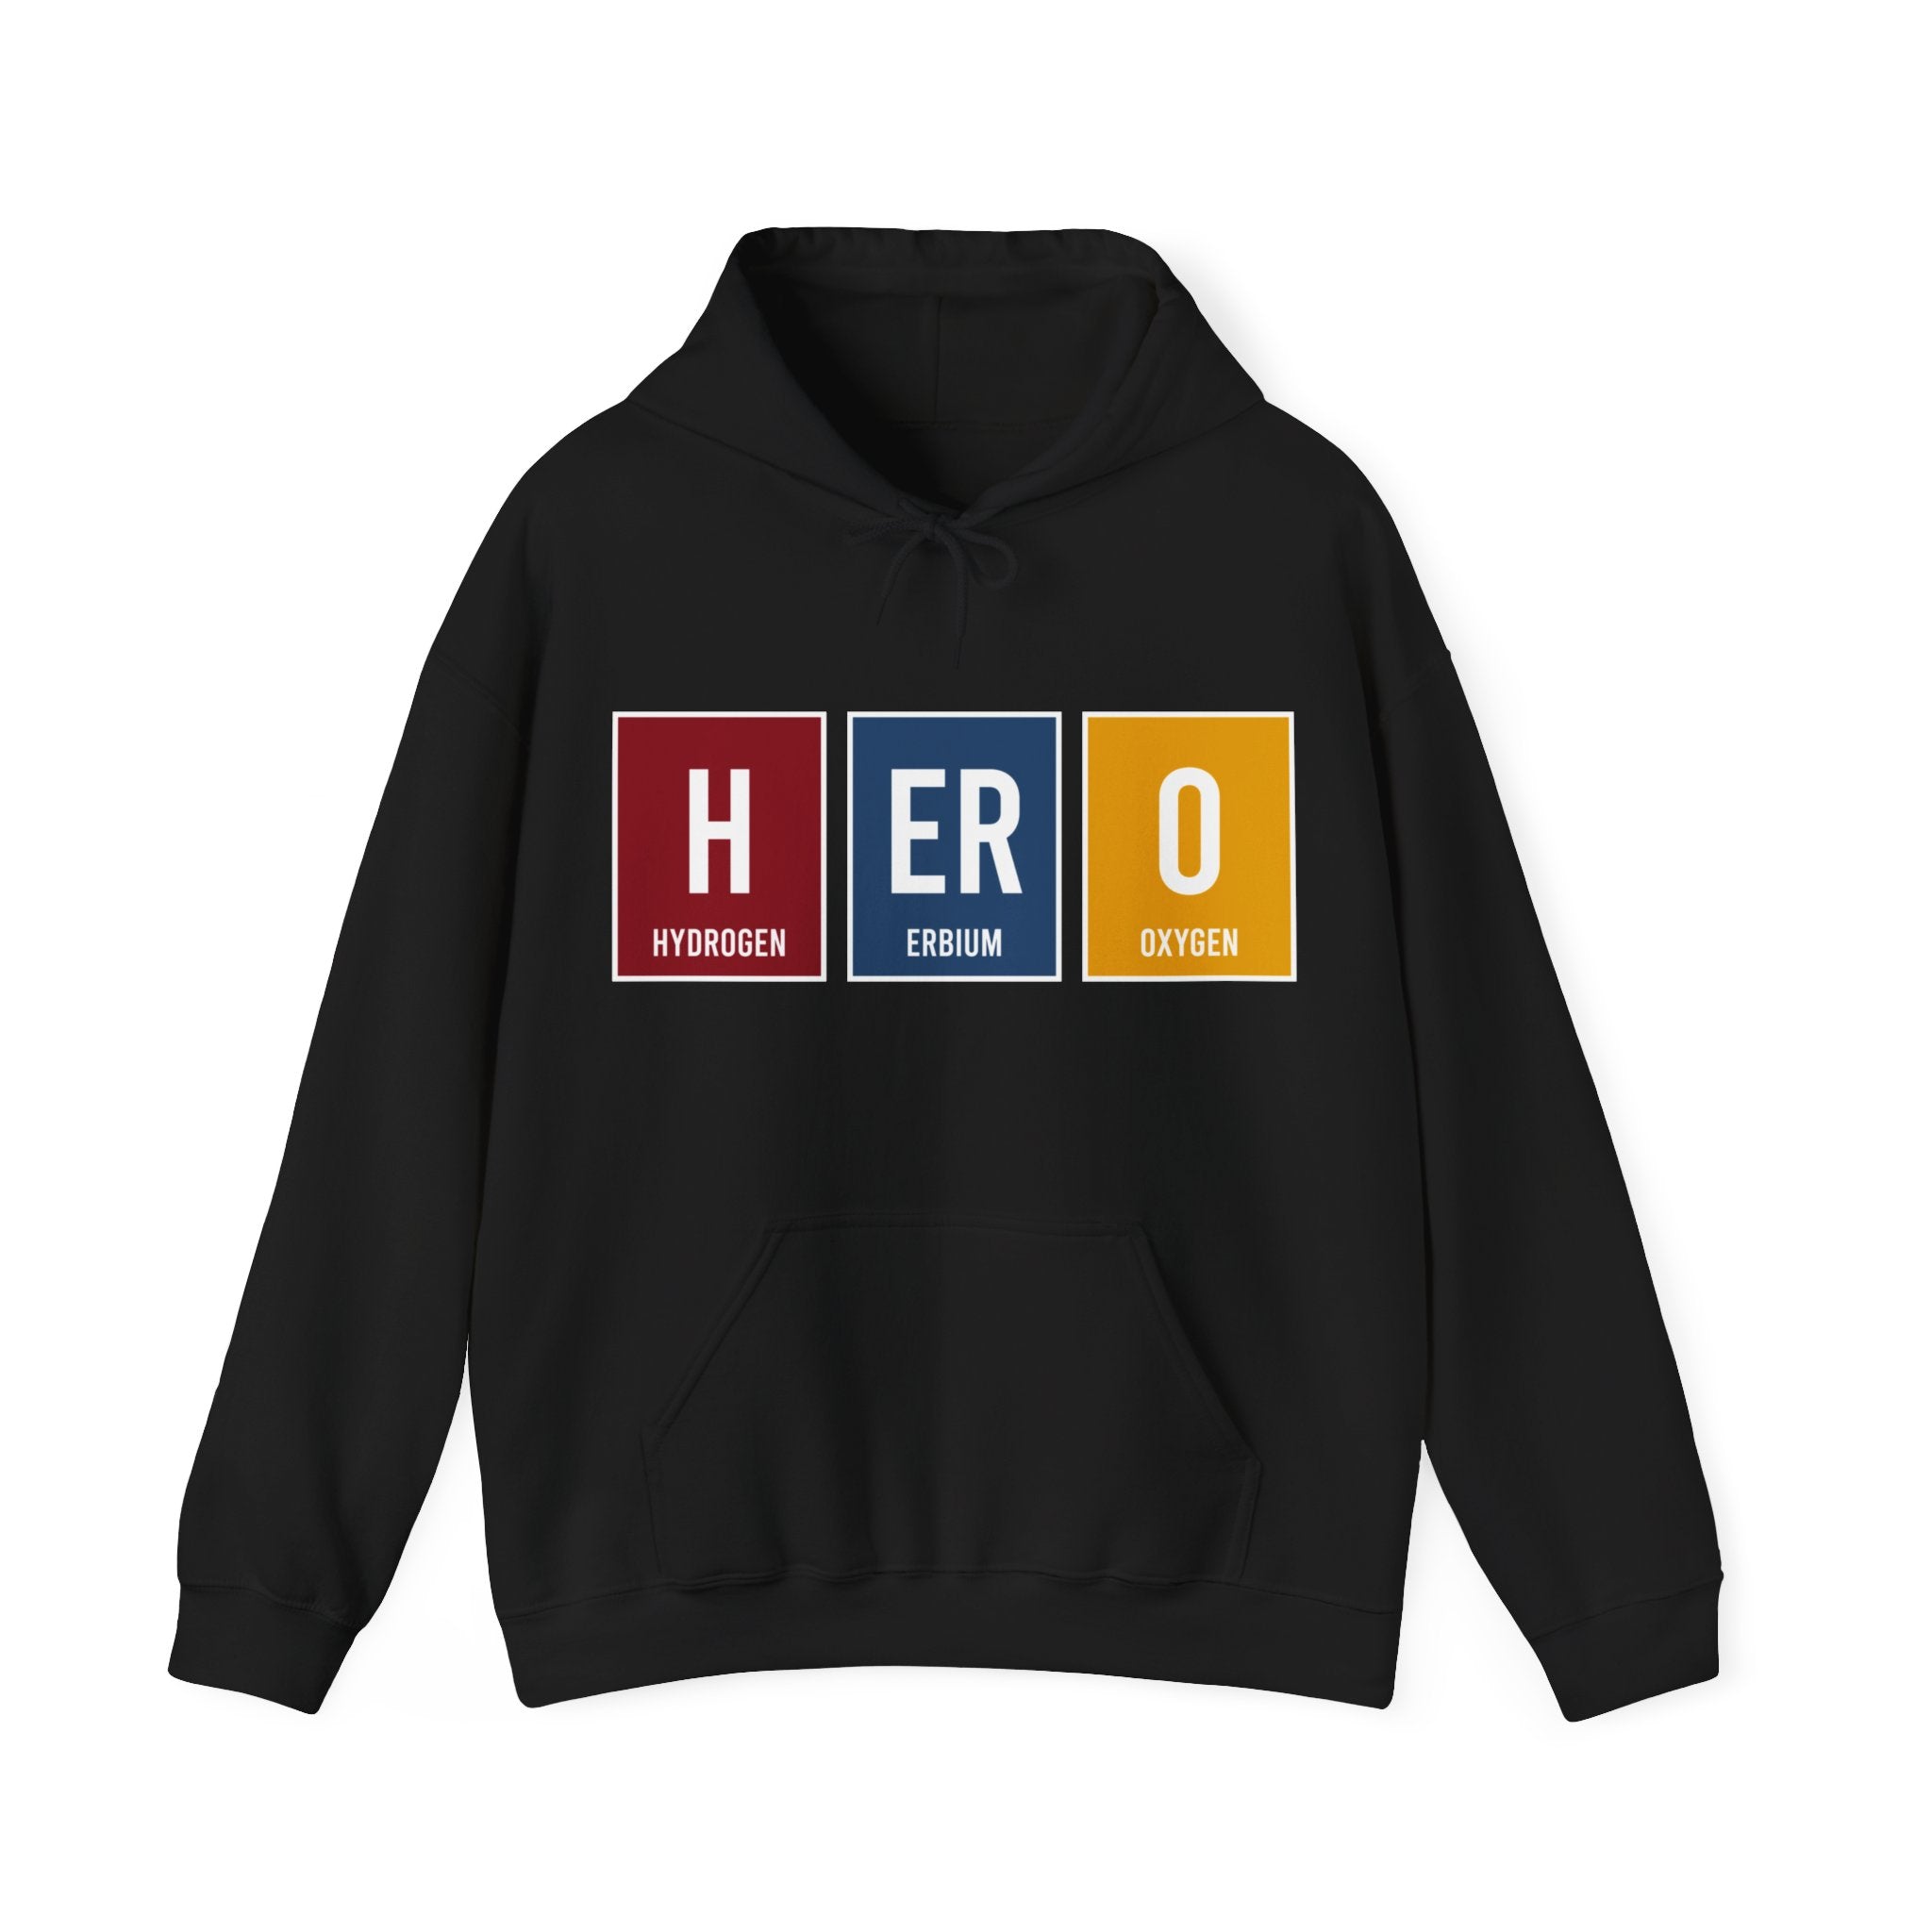 This HERO - Hooded Sweatshirt showcases HEROism with the word "HERO" cleverly spelled using periodic table elements: Hydrogen (H), Erbium (Er), and Oxygen (O).